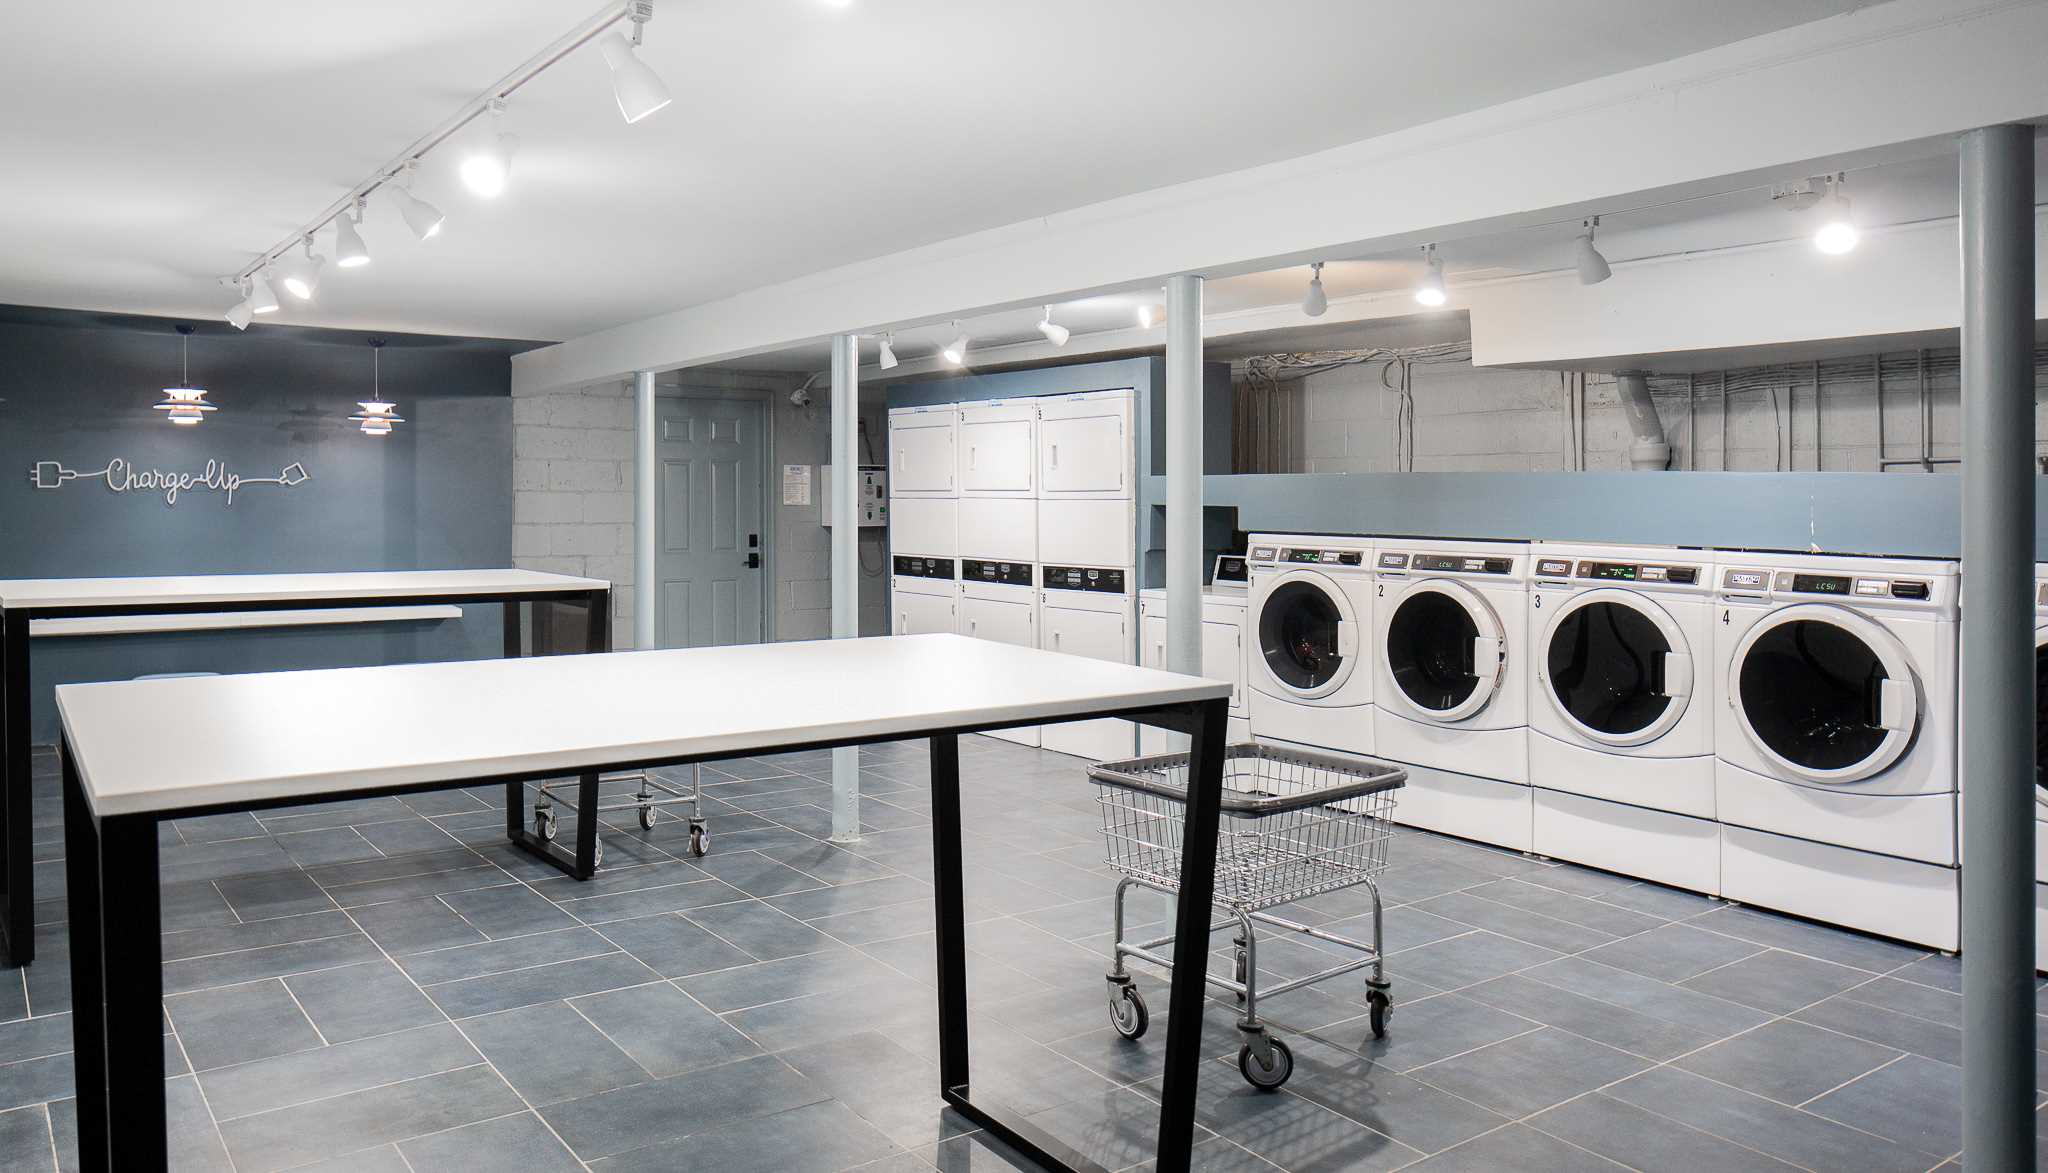 Communal Laundry Room at Somerville Gardens